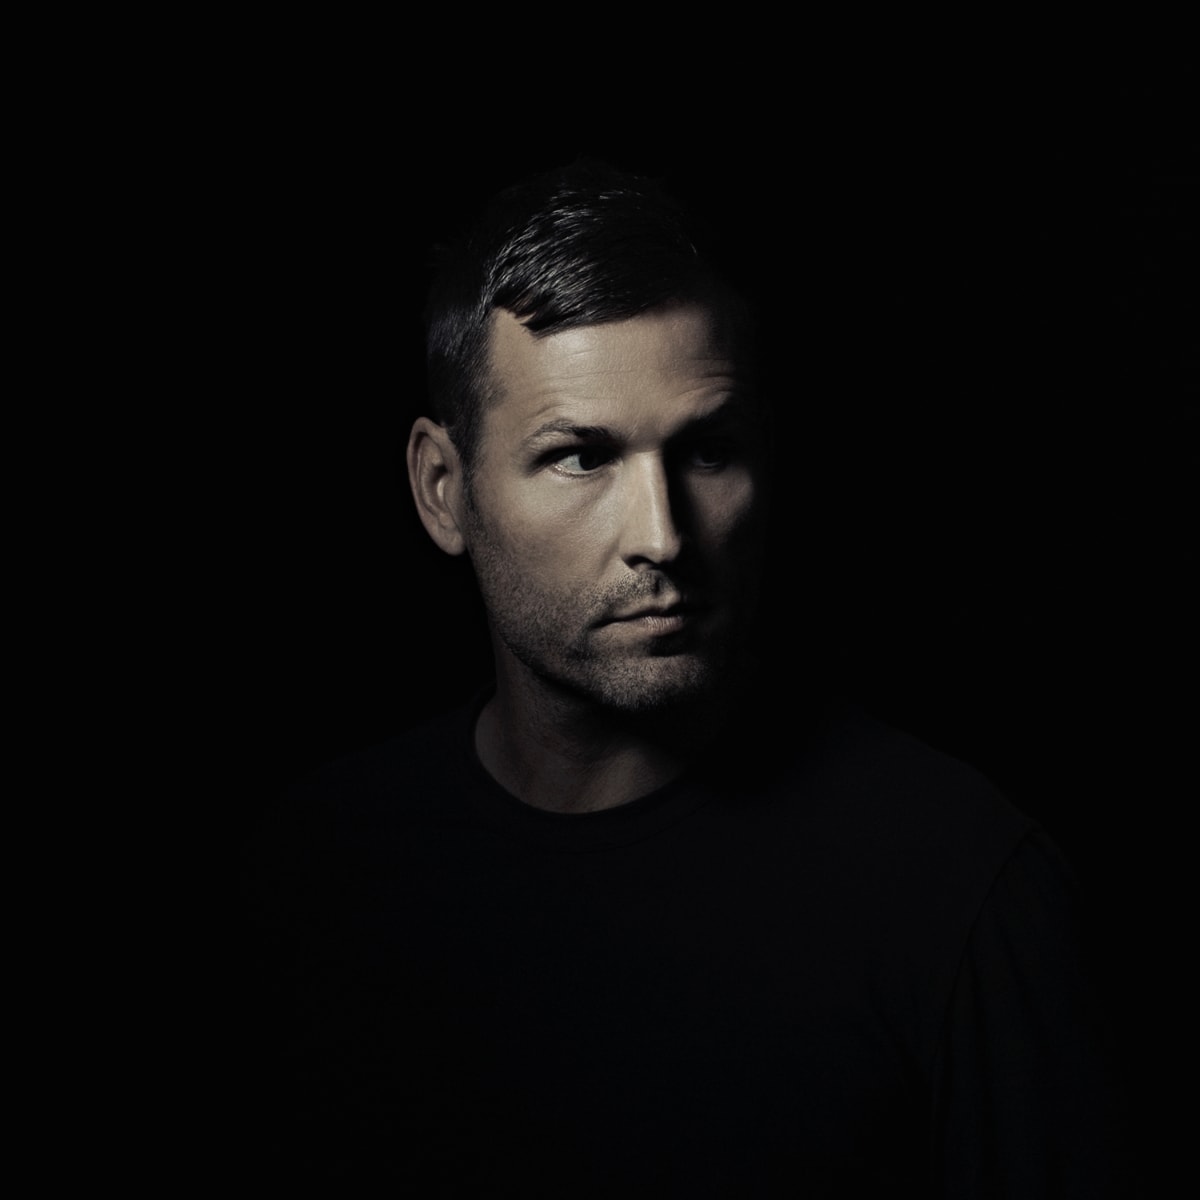 Kaskade Wants to Bring Redux to Bigger Rooms, Starting with Brooklyn Mirage  [Interview]  - The Latest Electronic Dance Music News, Reviews &  Artists